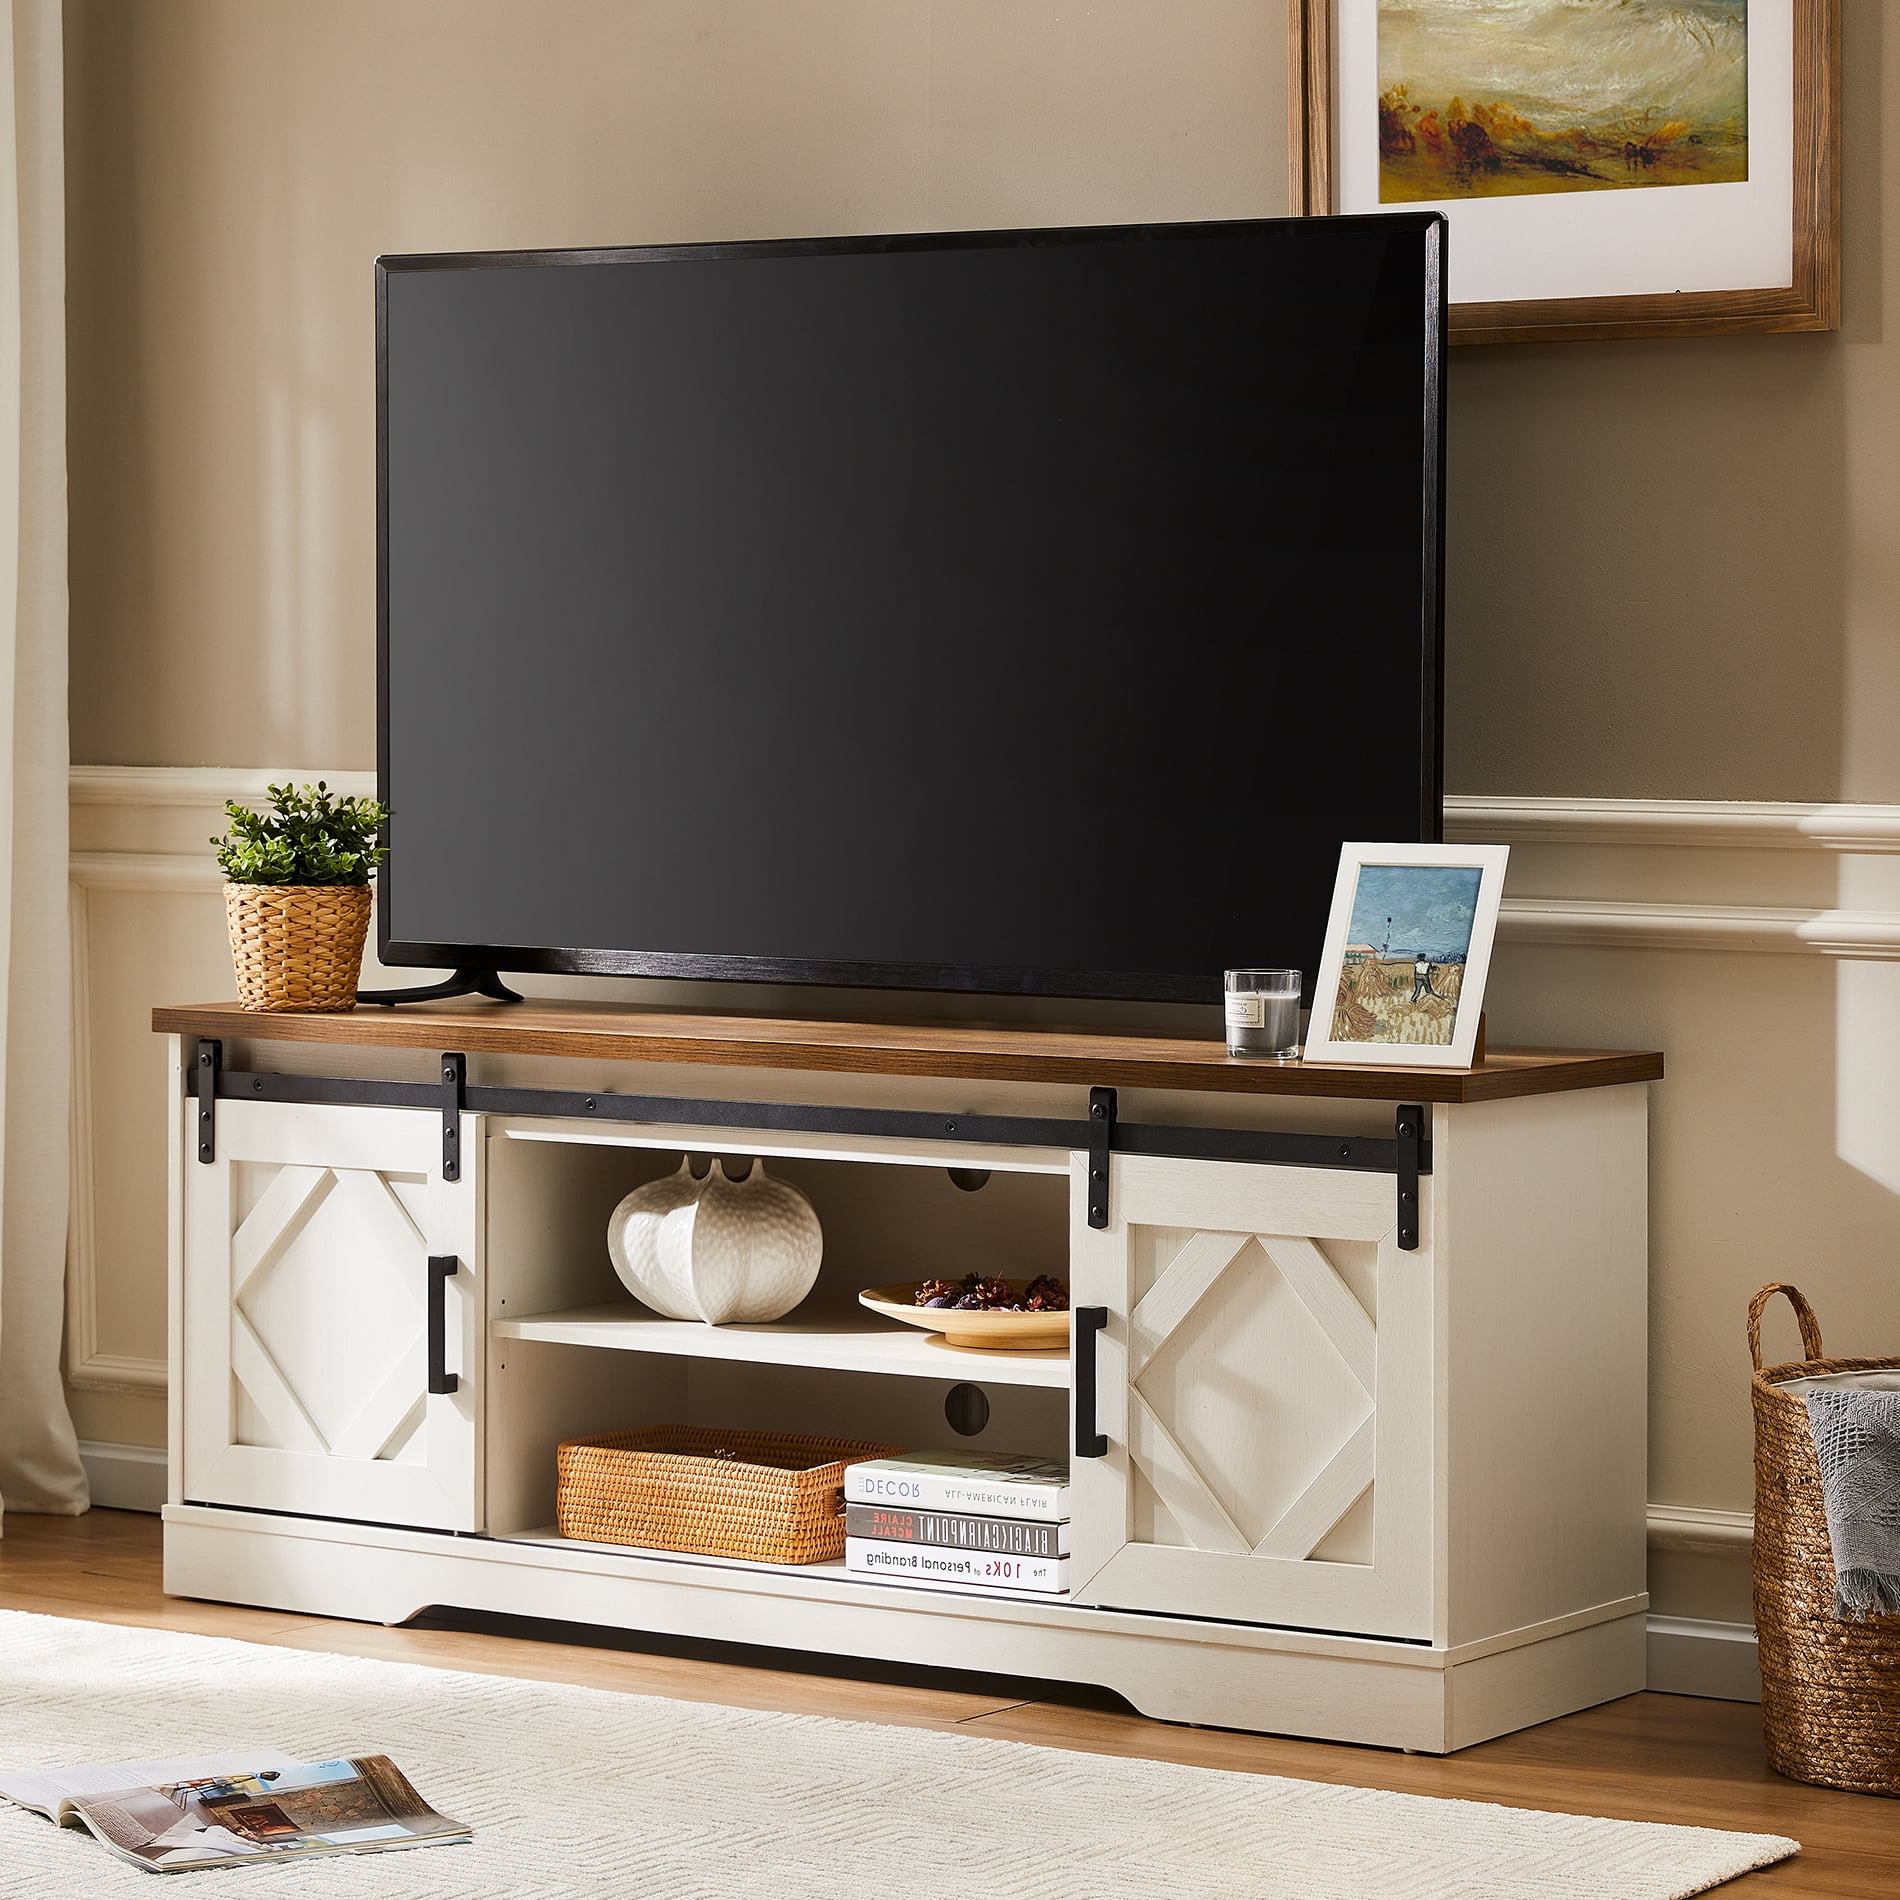 TV Stand Coffee Table Media Entertainment Center Console Cabinet Living Room for sale online 